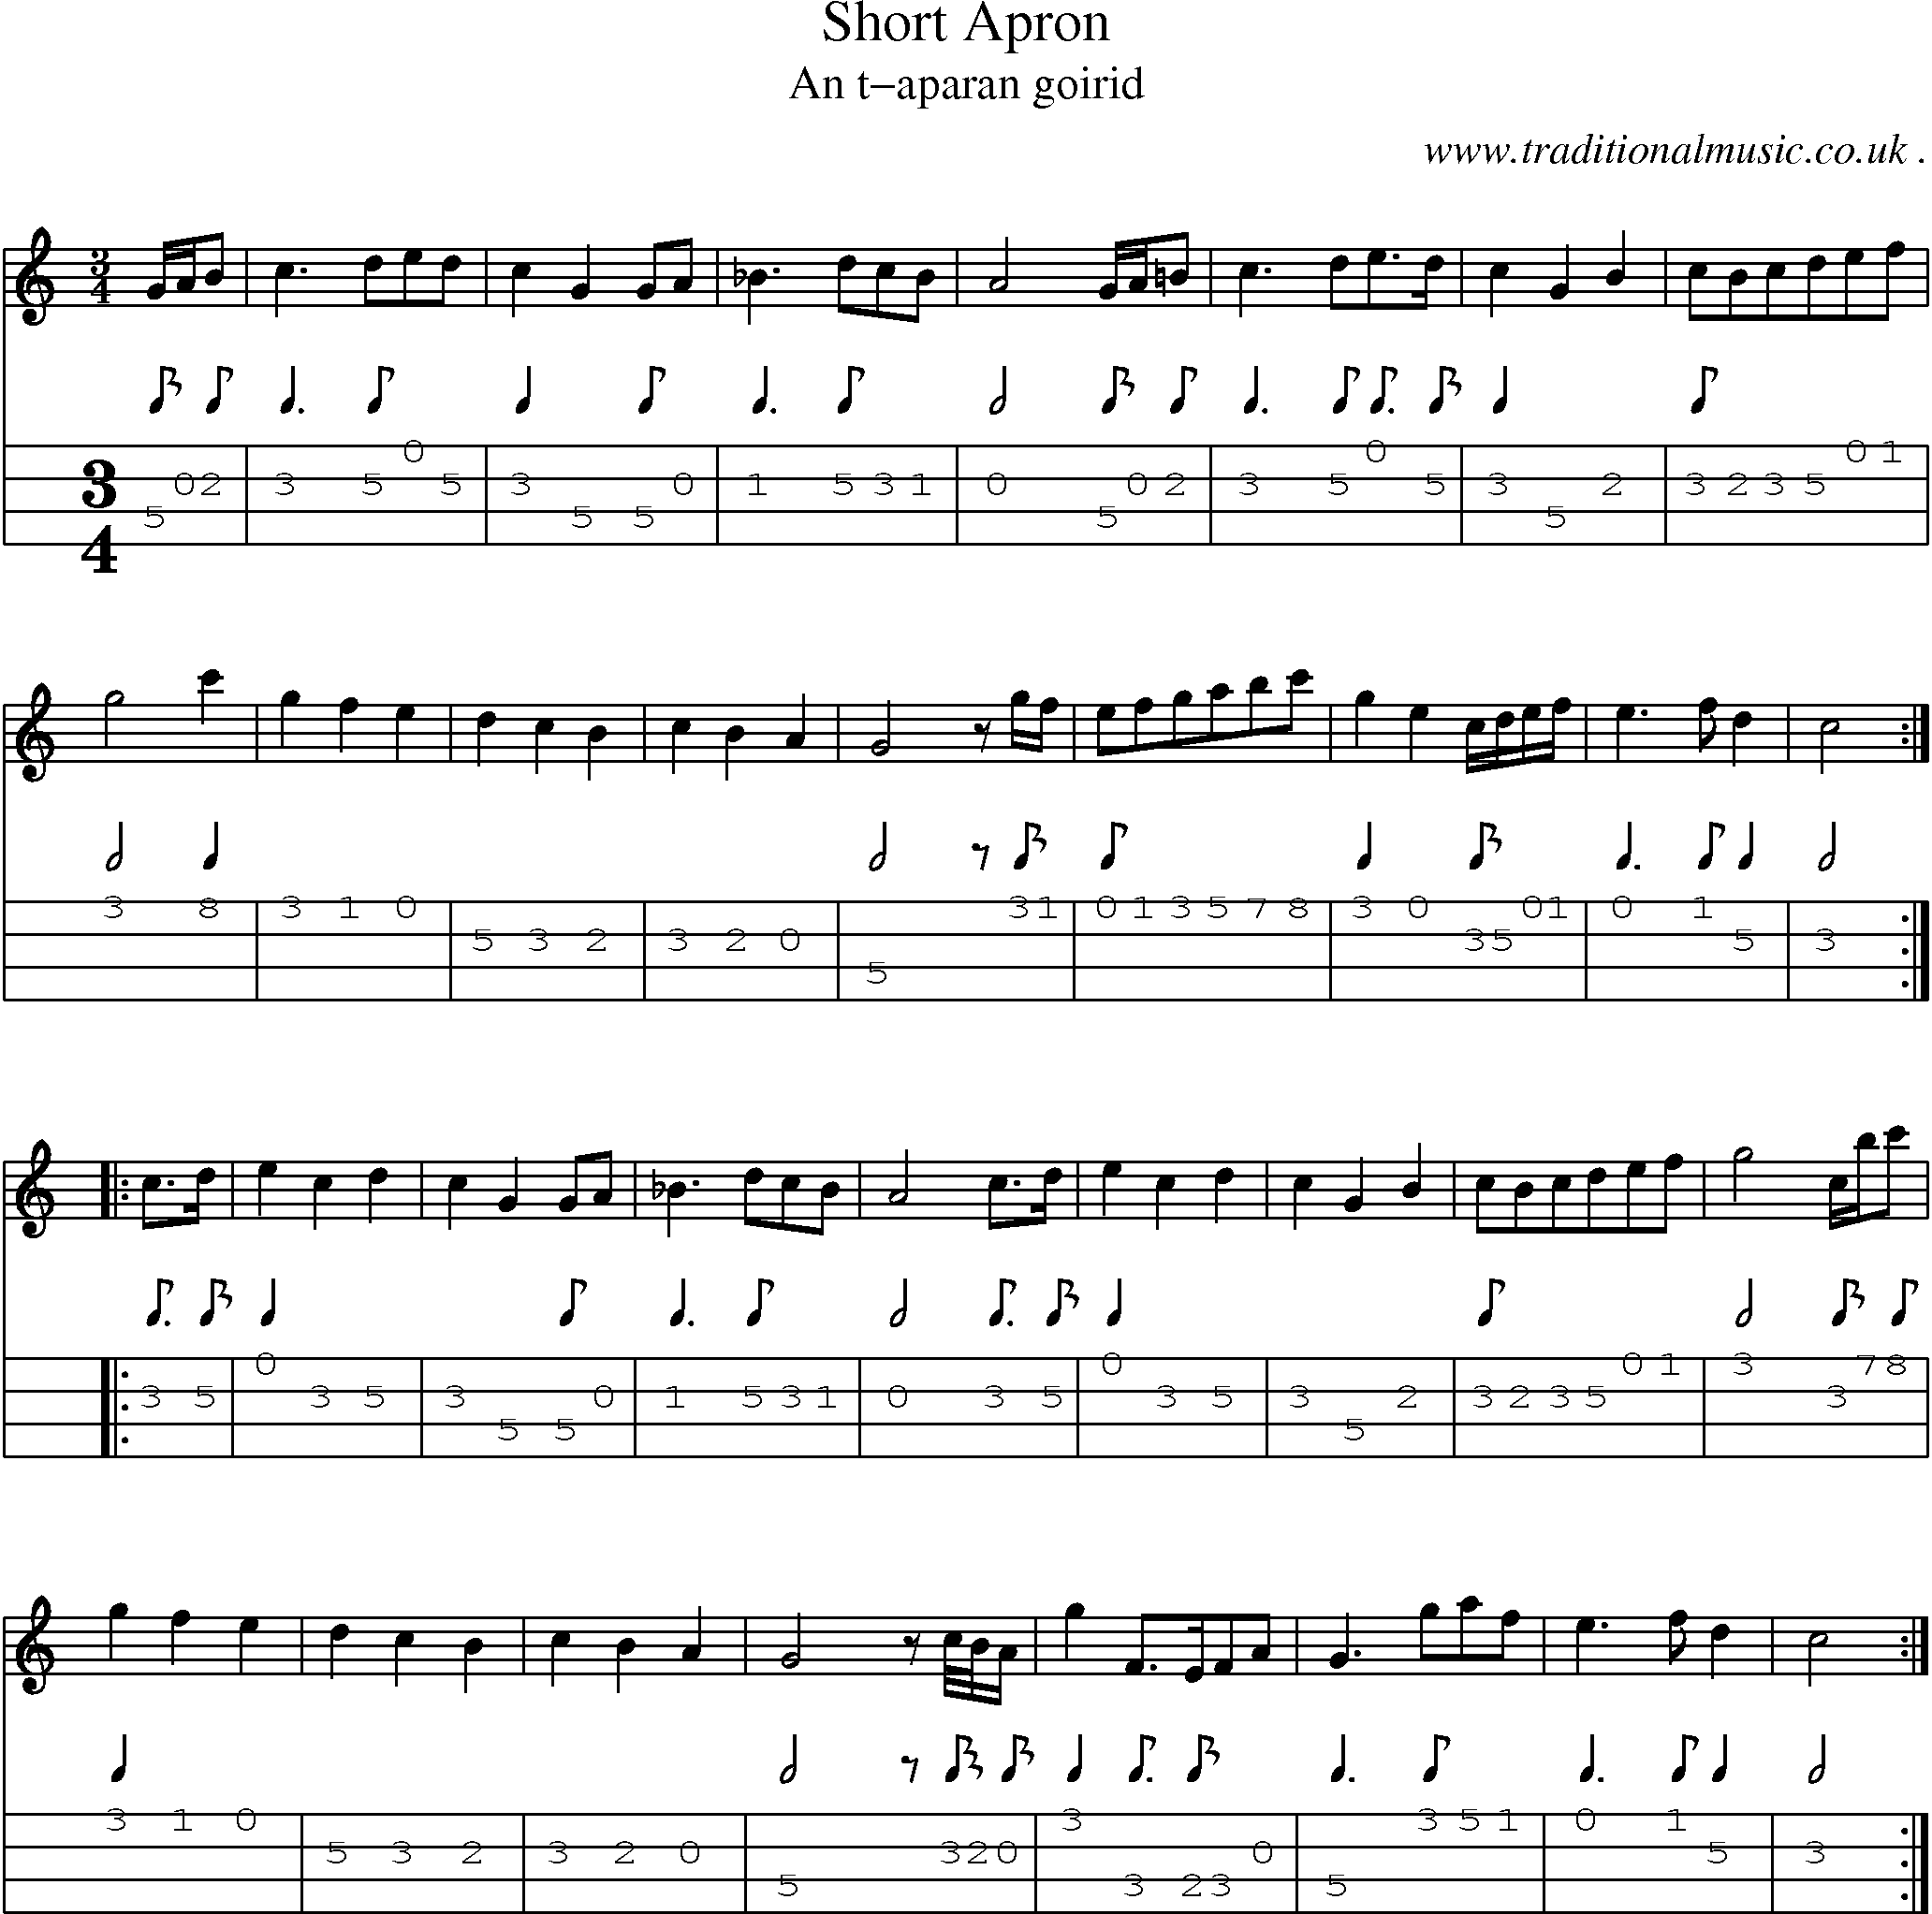 Sheet-music  score, Chords and Mandolin Tabs for Short Apron